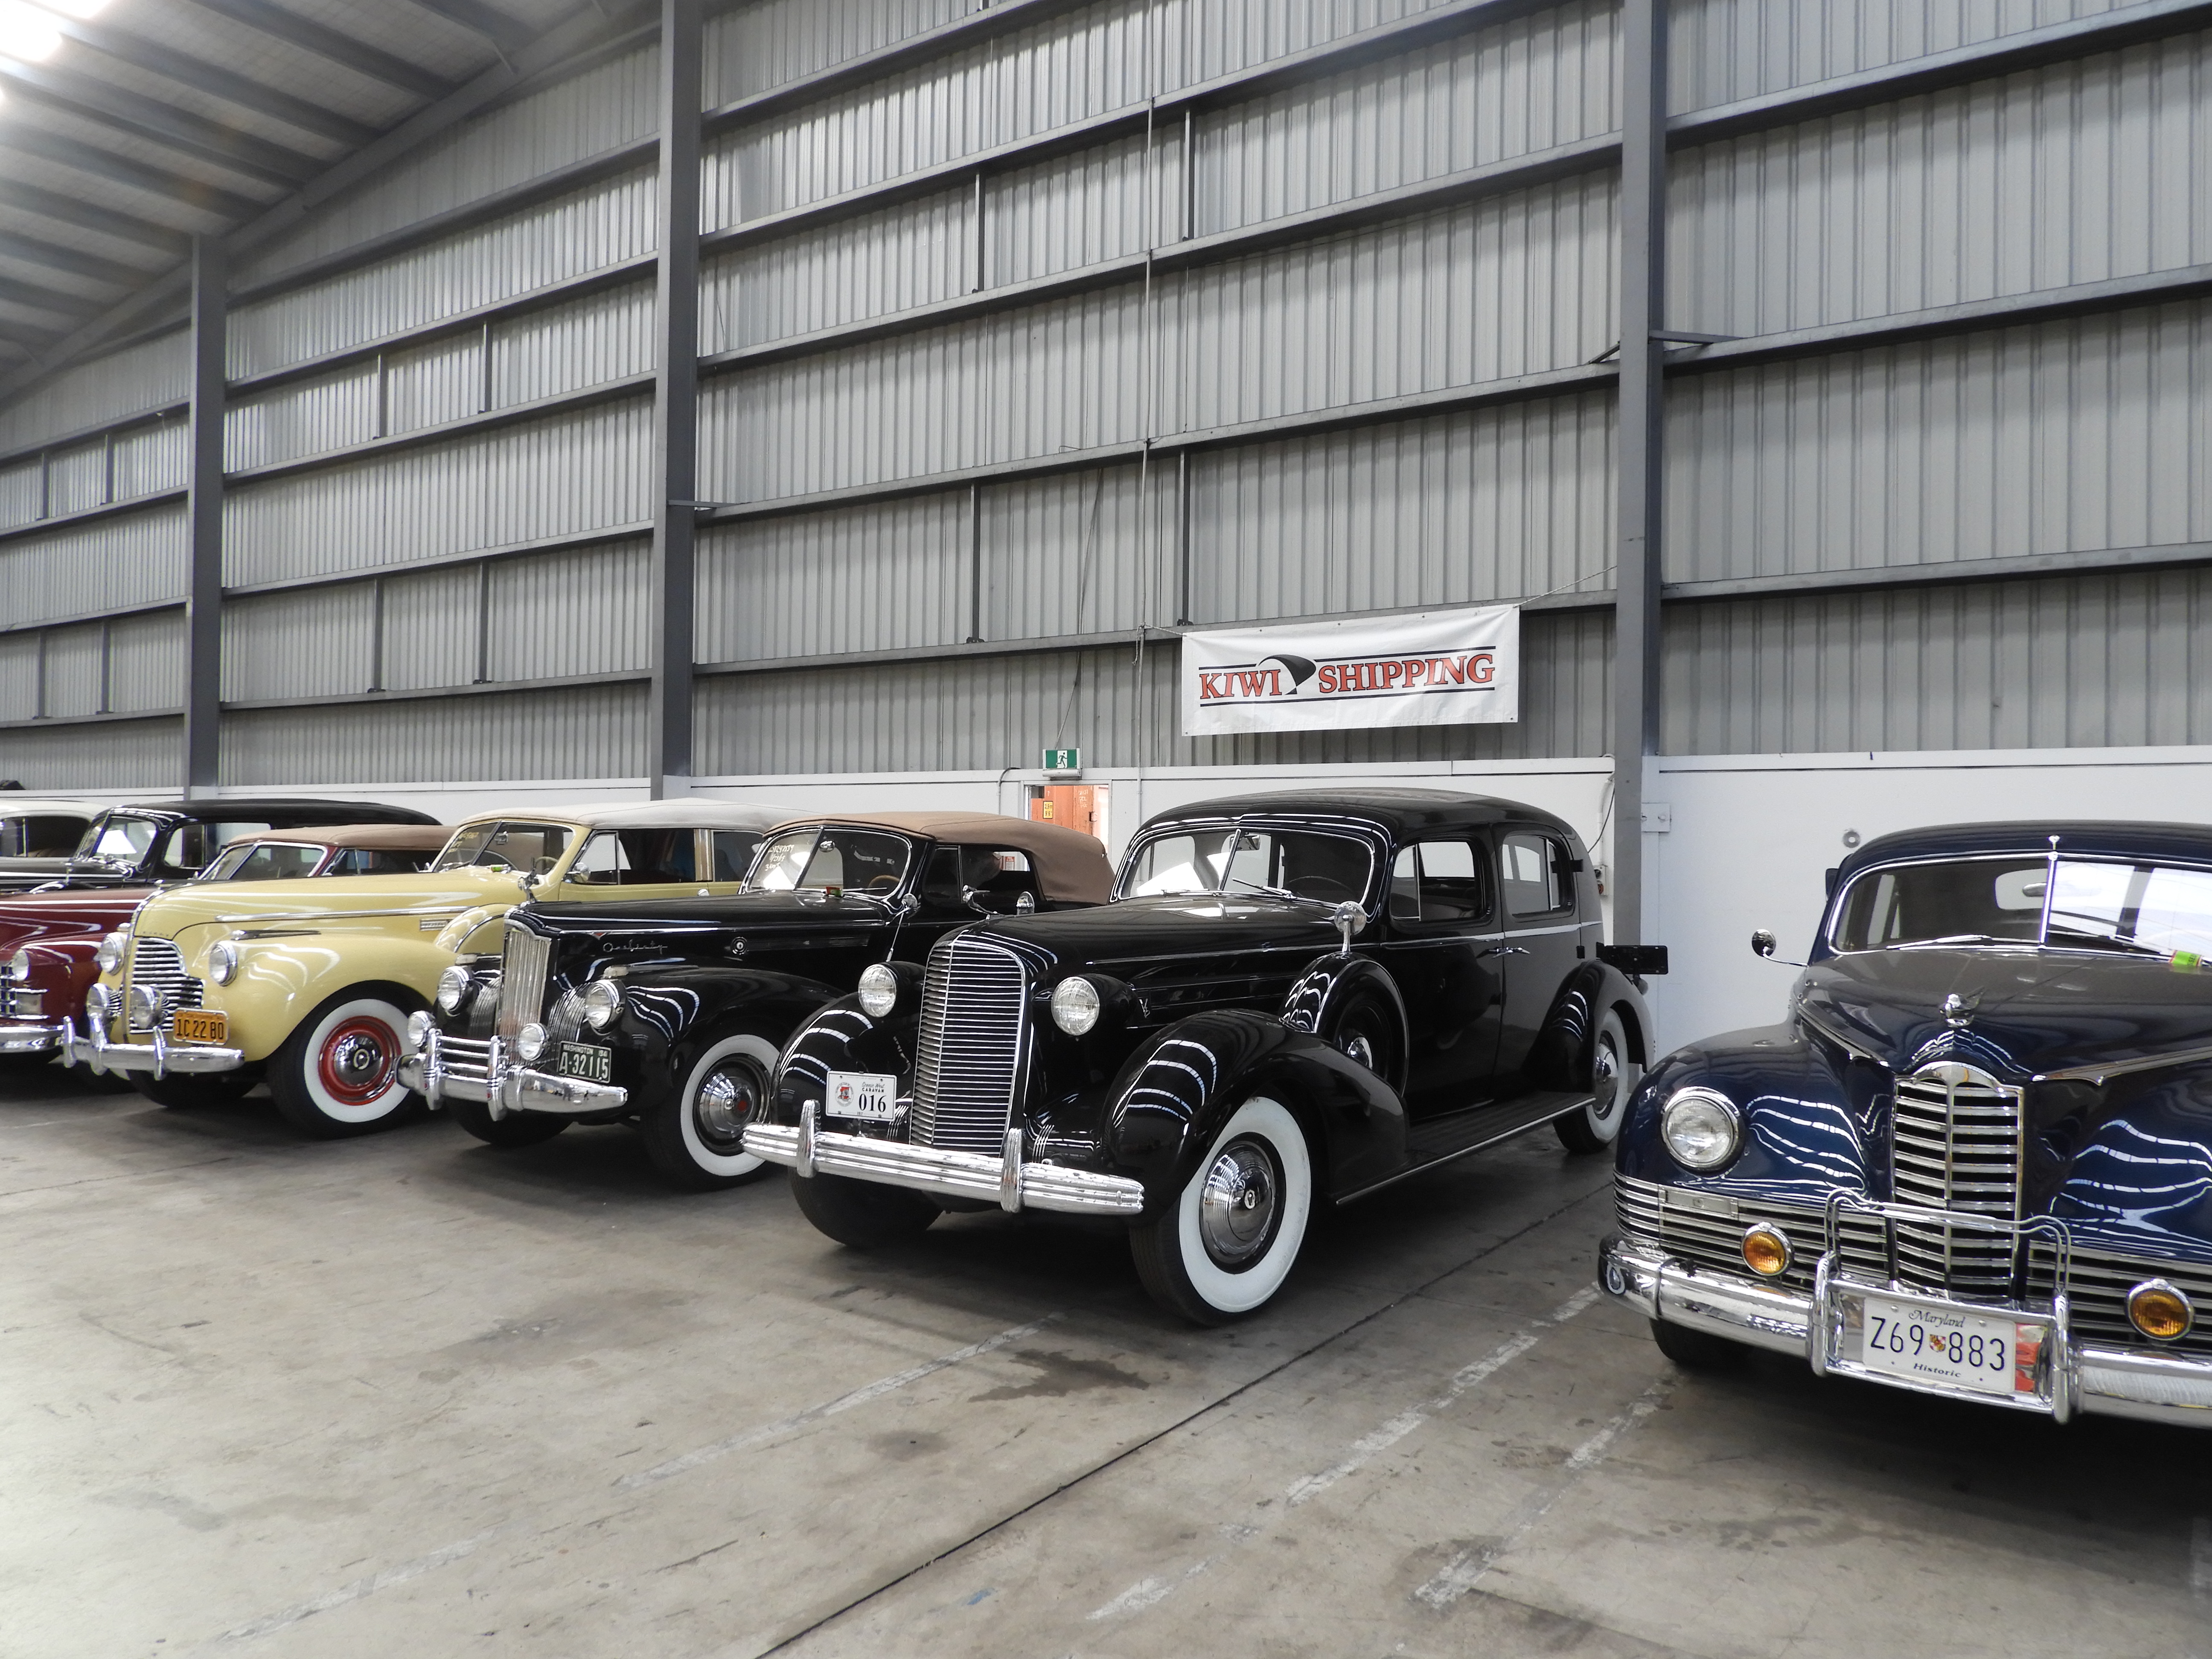 American classic cars travelling New Zealand roads as temporary imports